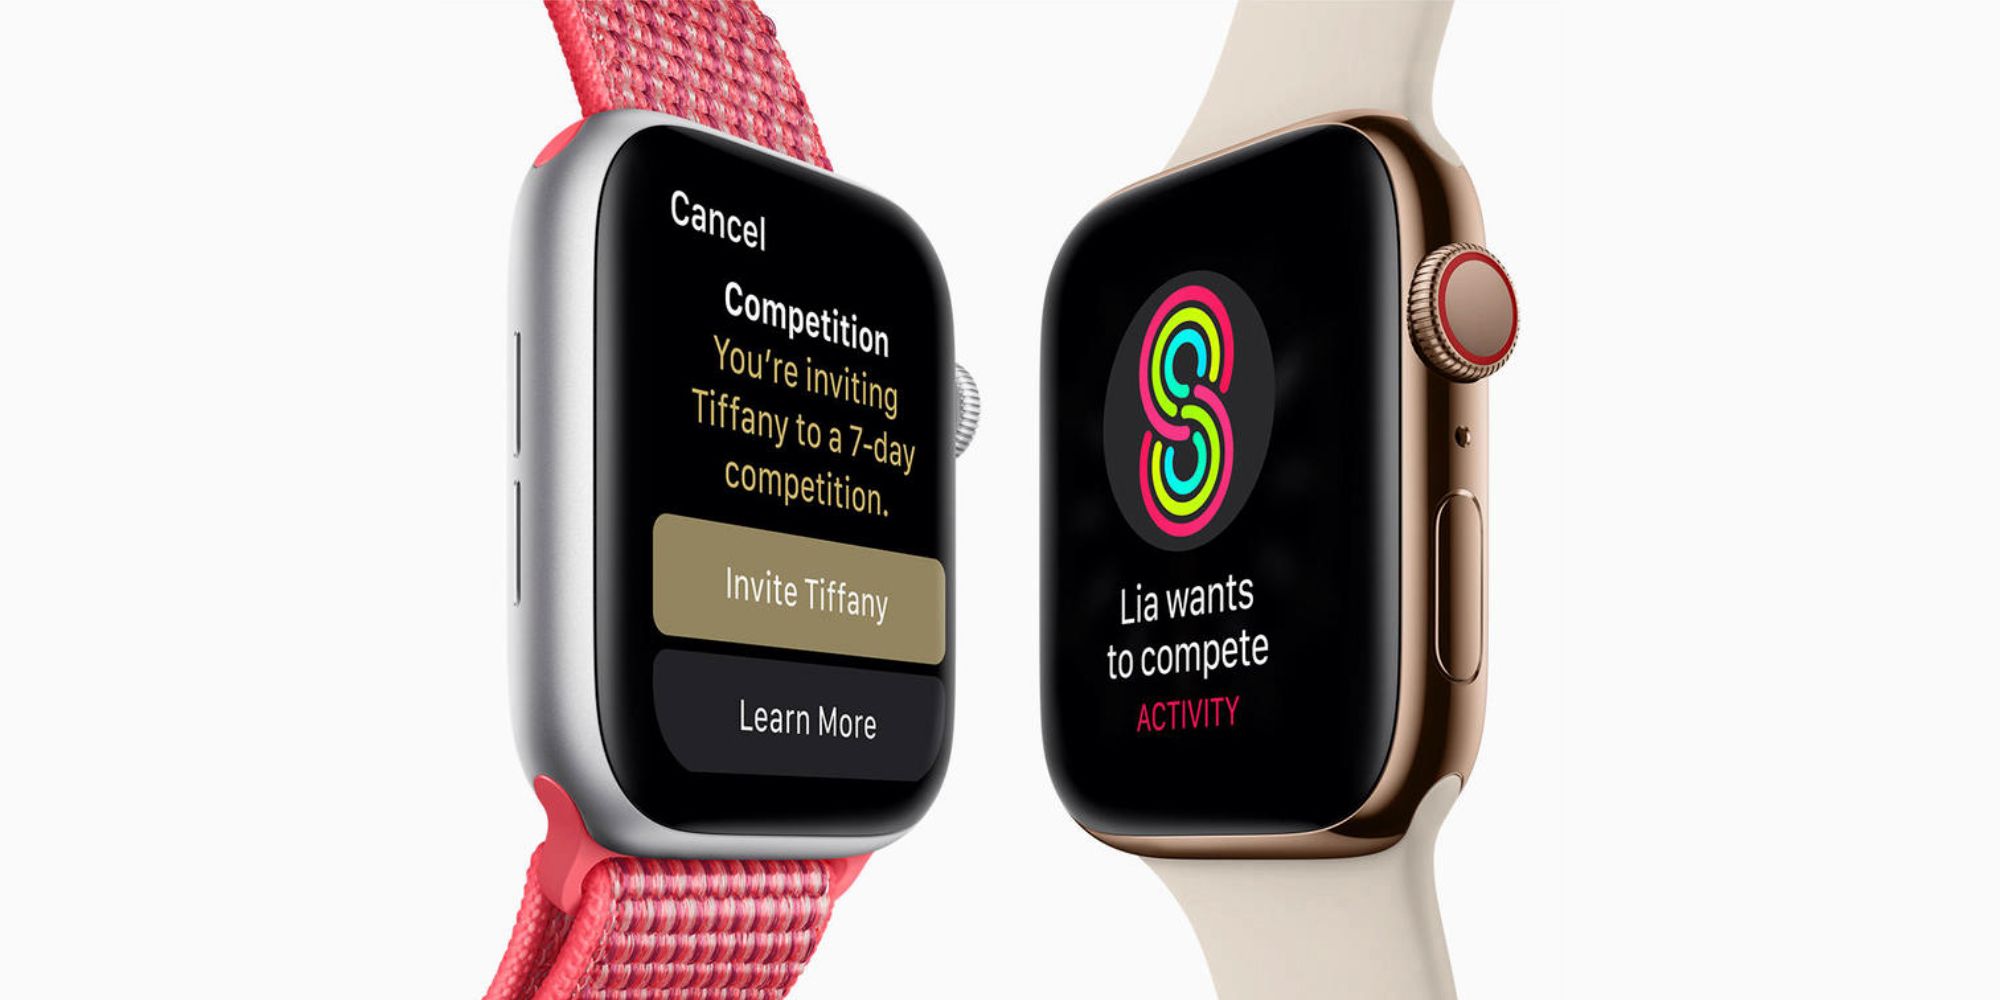 Workout competition on Apple Watch Series 4